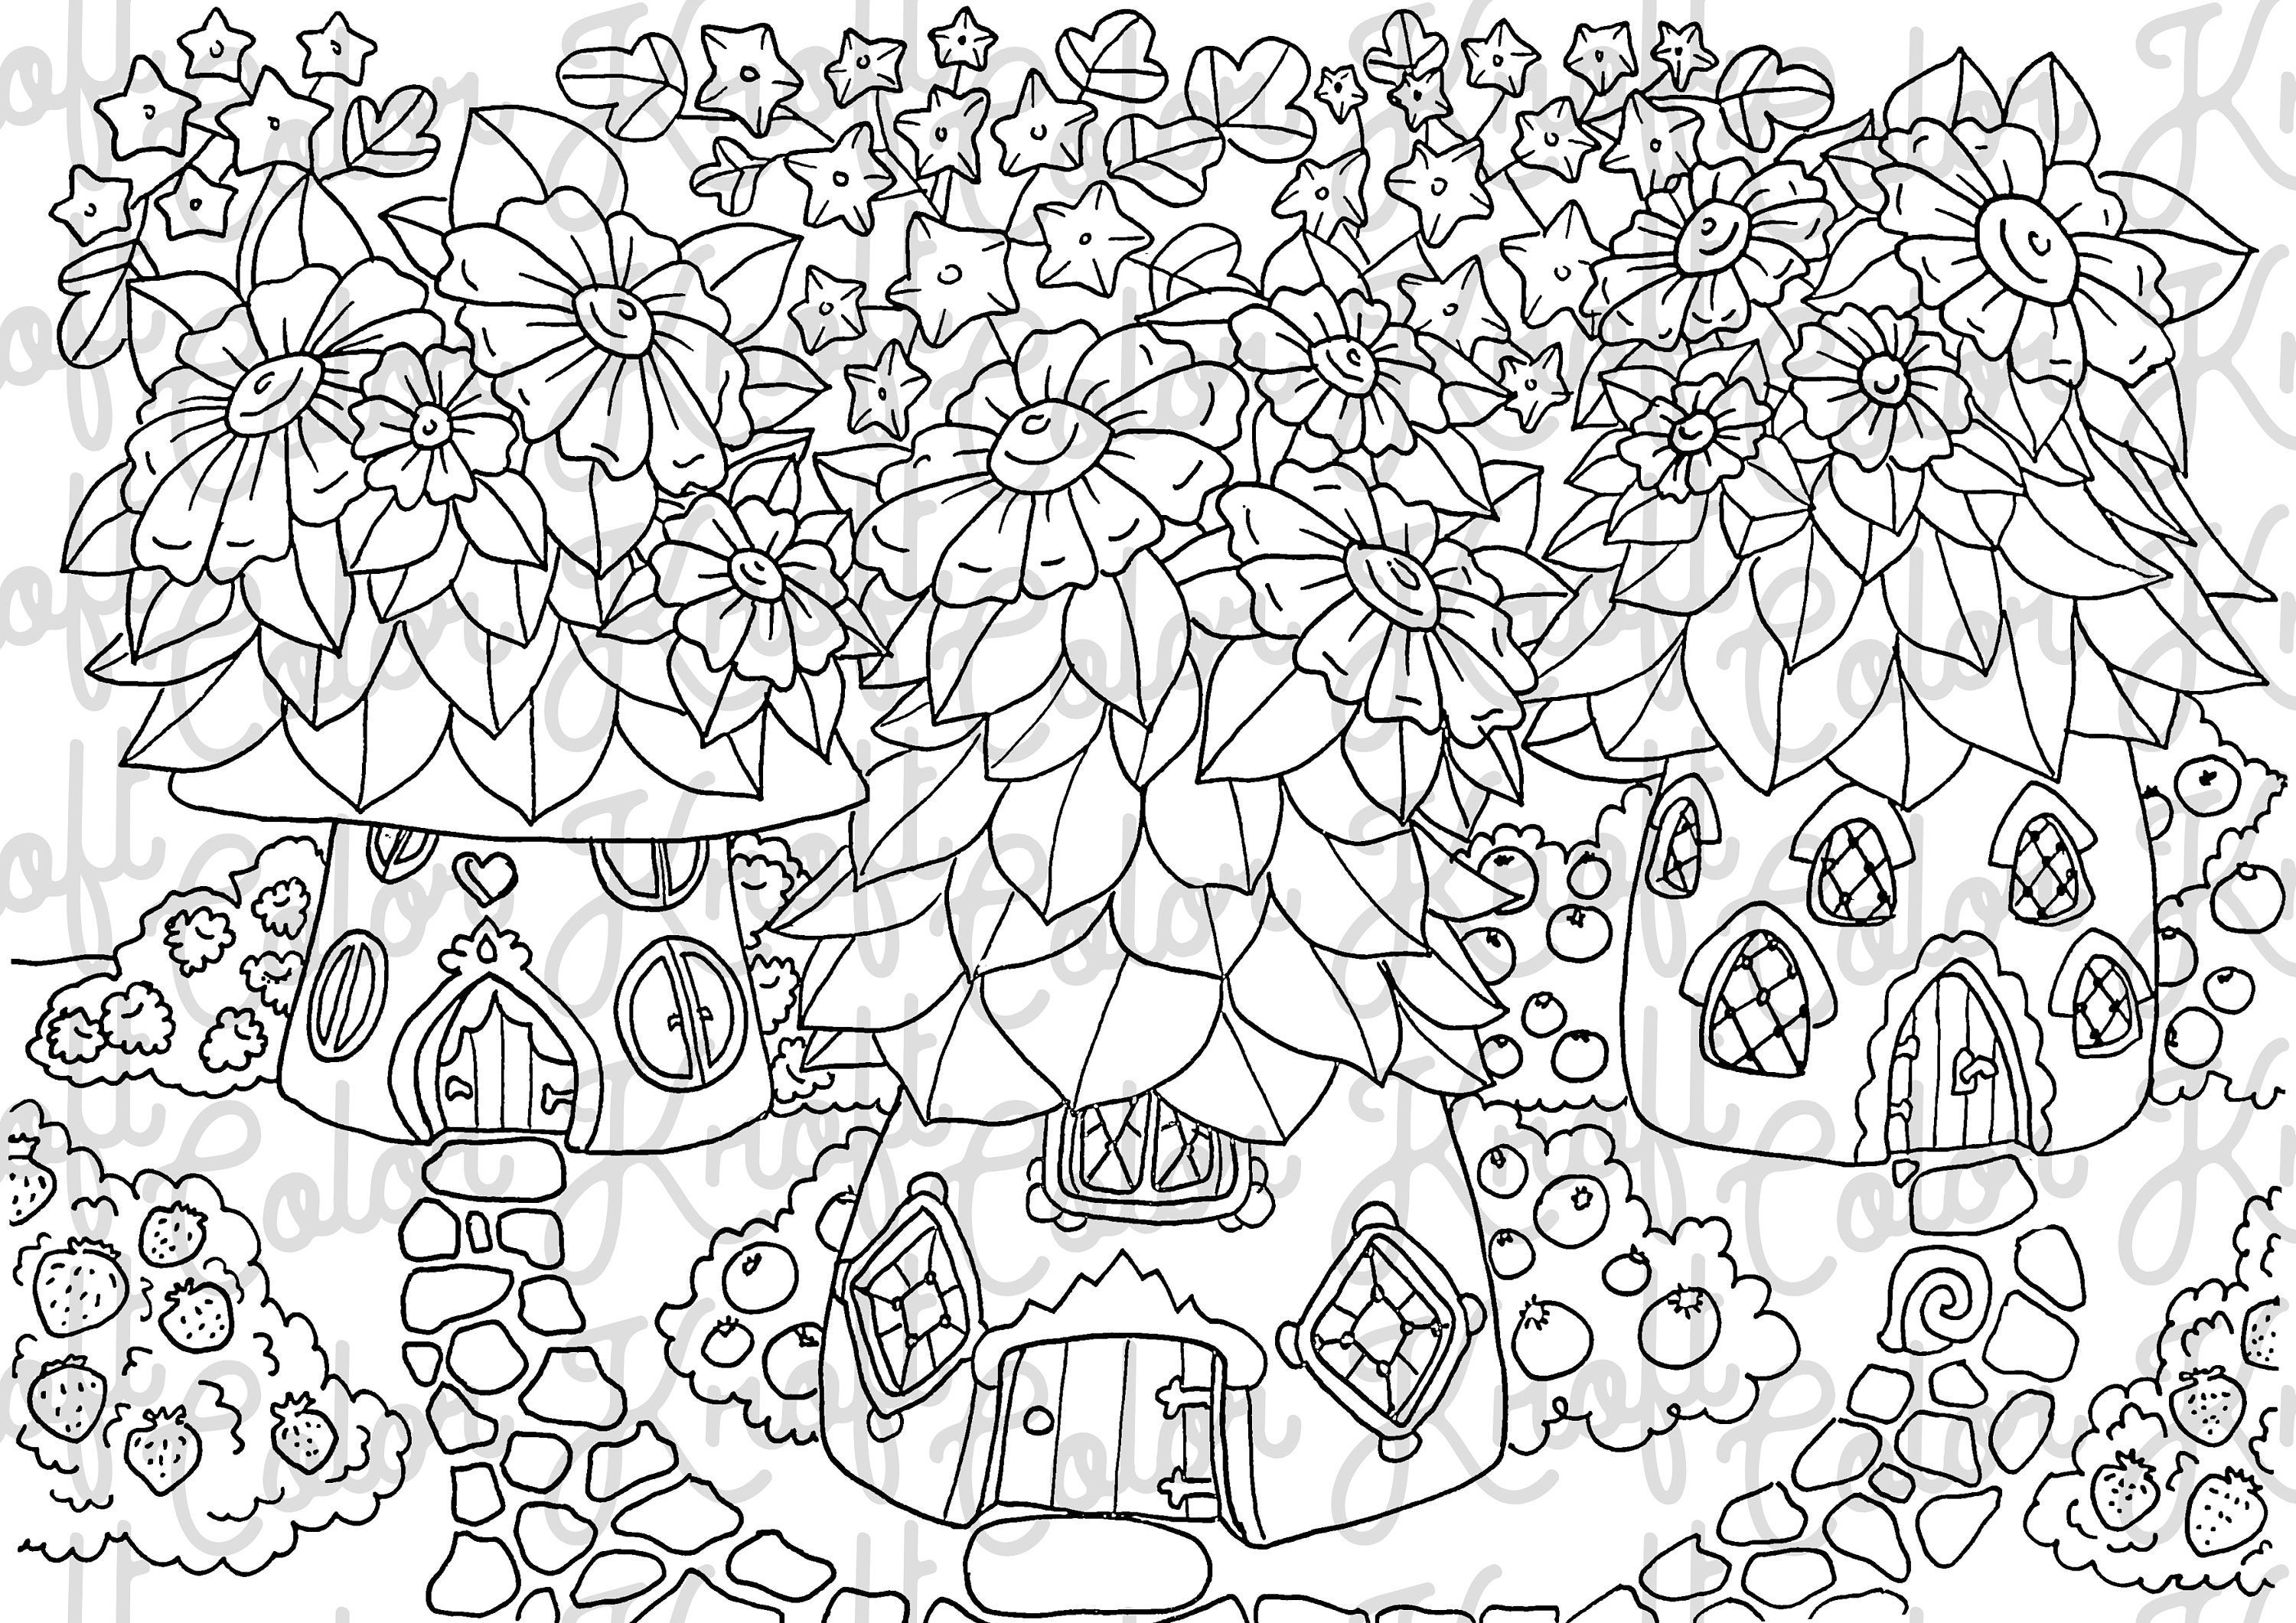 fairy-garden-coloring-page-house-of-fairies-digital-download